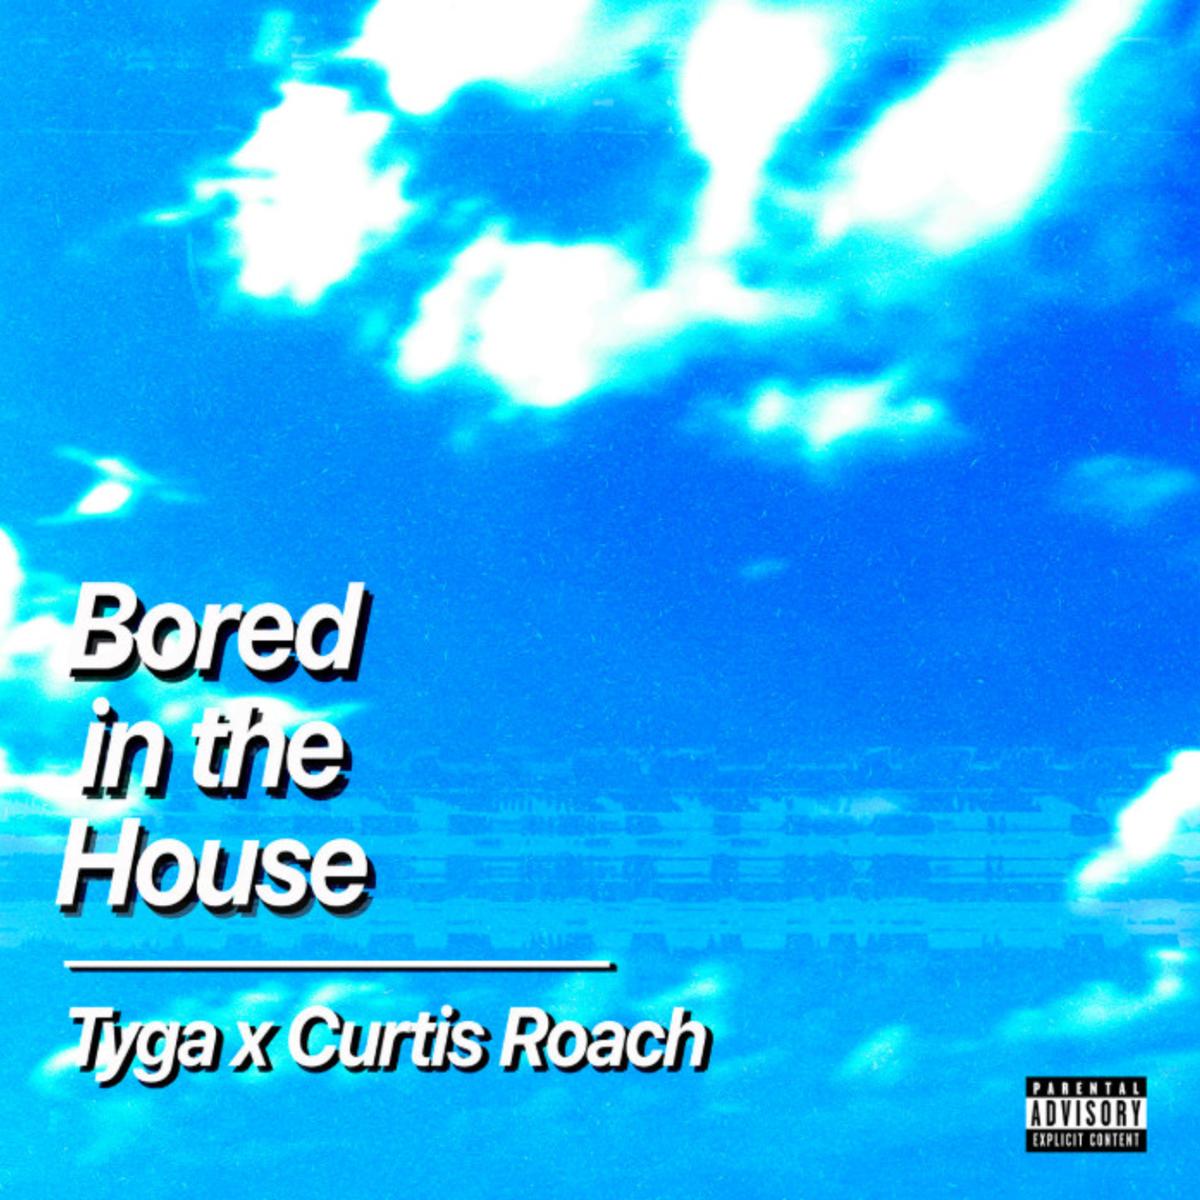 Tyga & Curtis Roach - Bored in the House